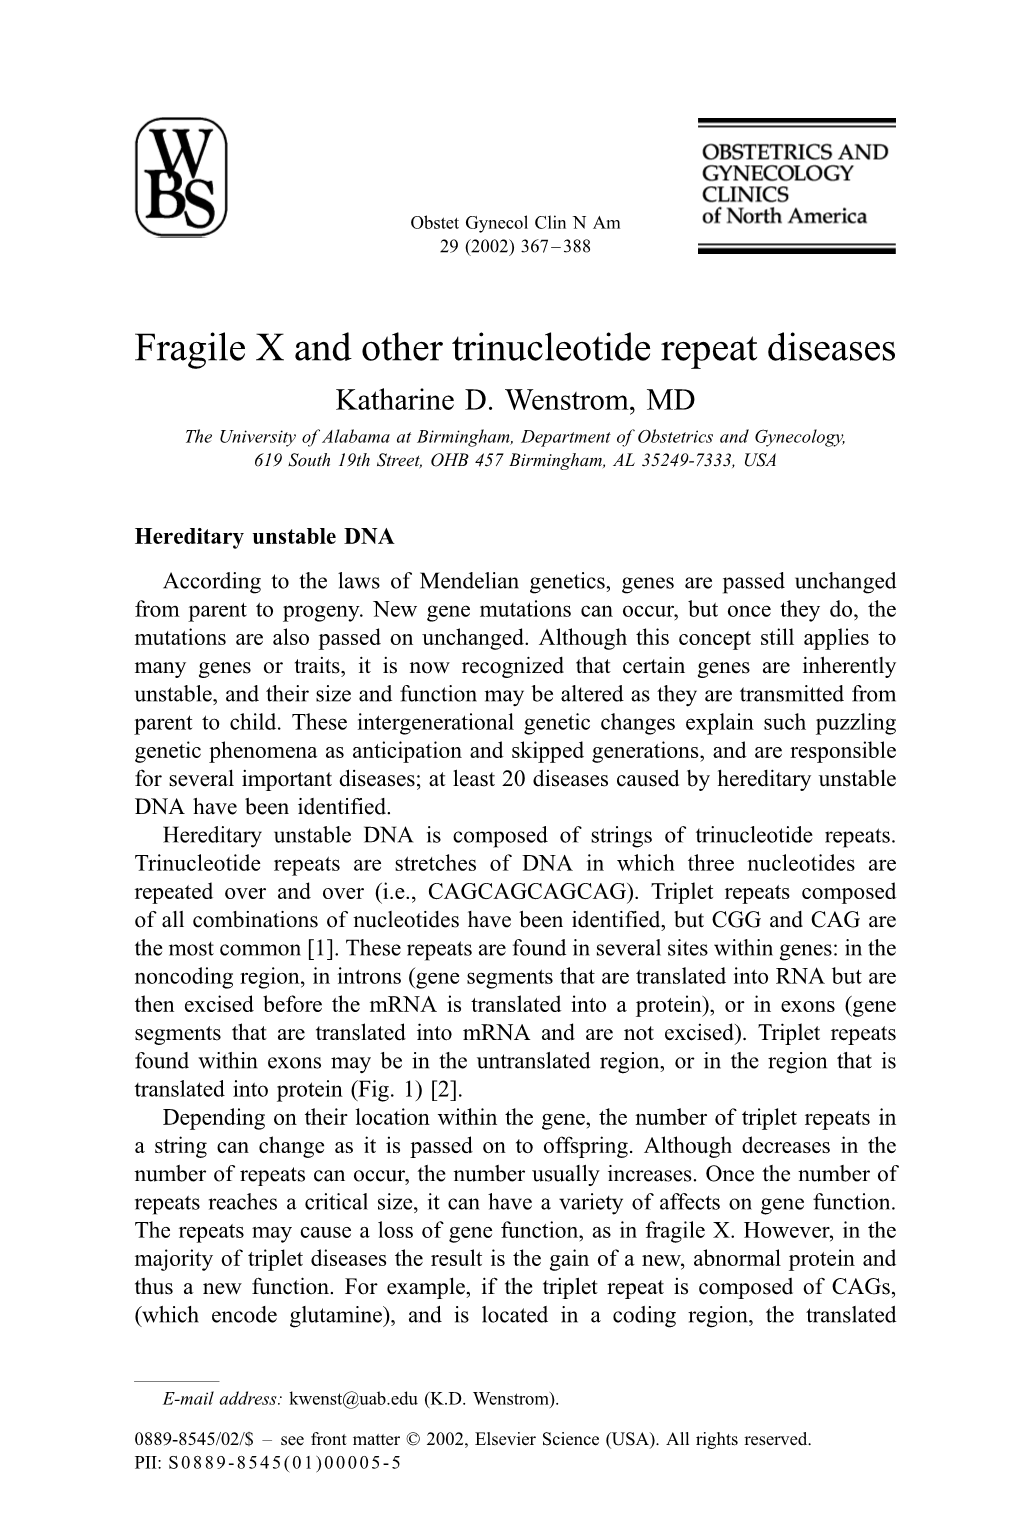 Fragile X and Other Trinucleotide Repeat Diseases Katharine D